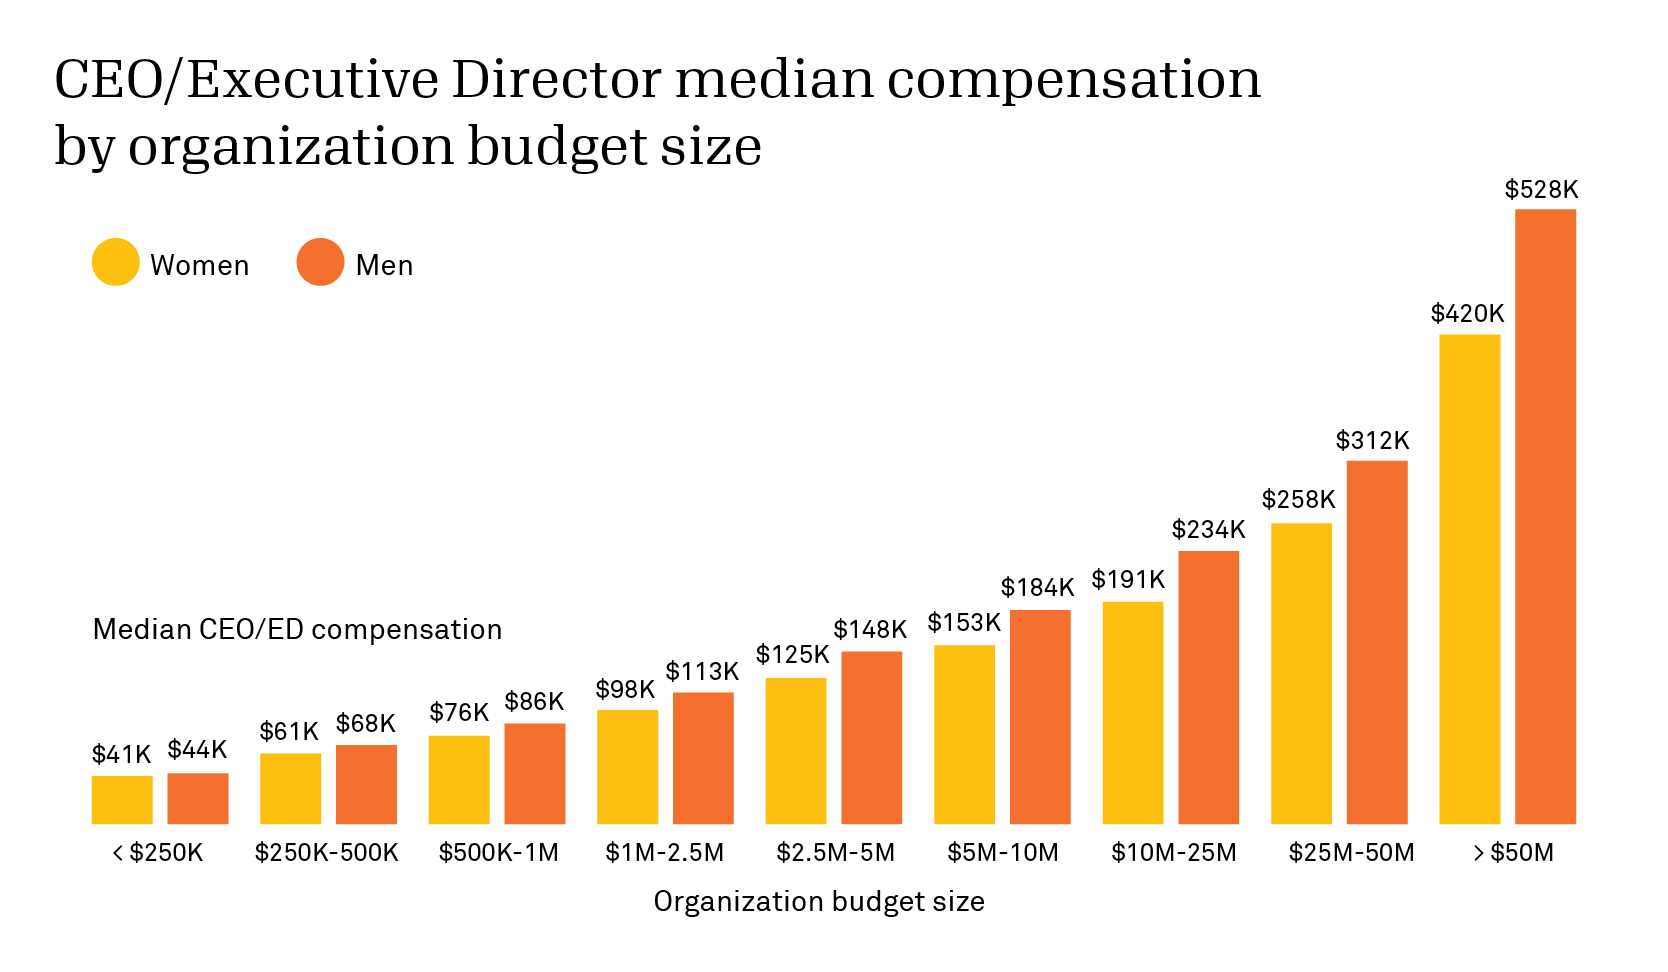 Median compensation of female nonprofit CEOs lags behind that of male CEOs at every budget level.